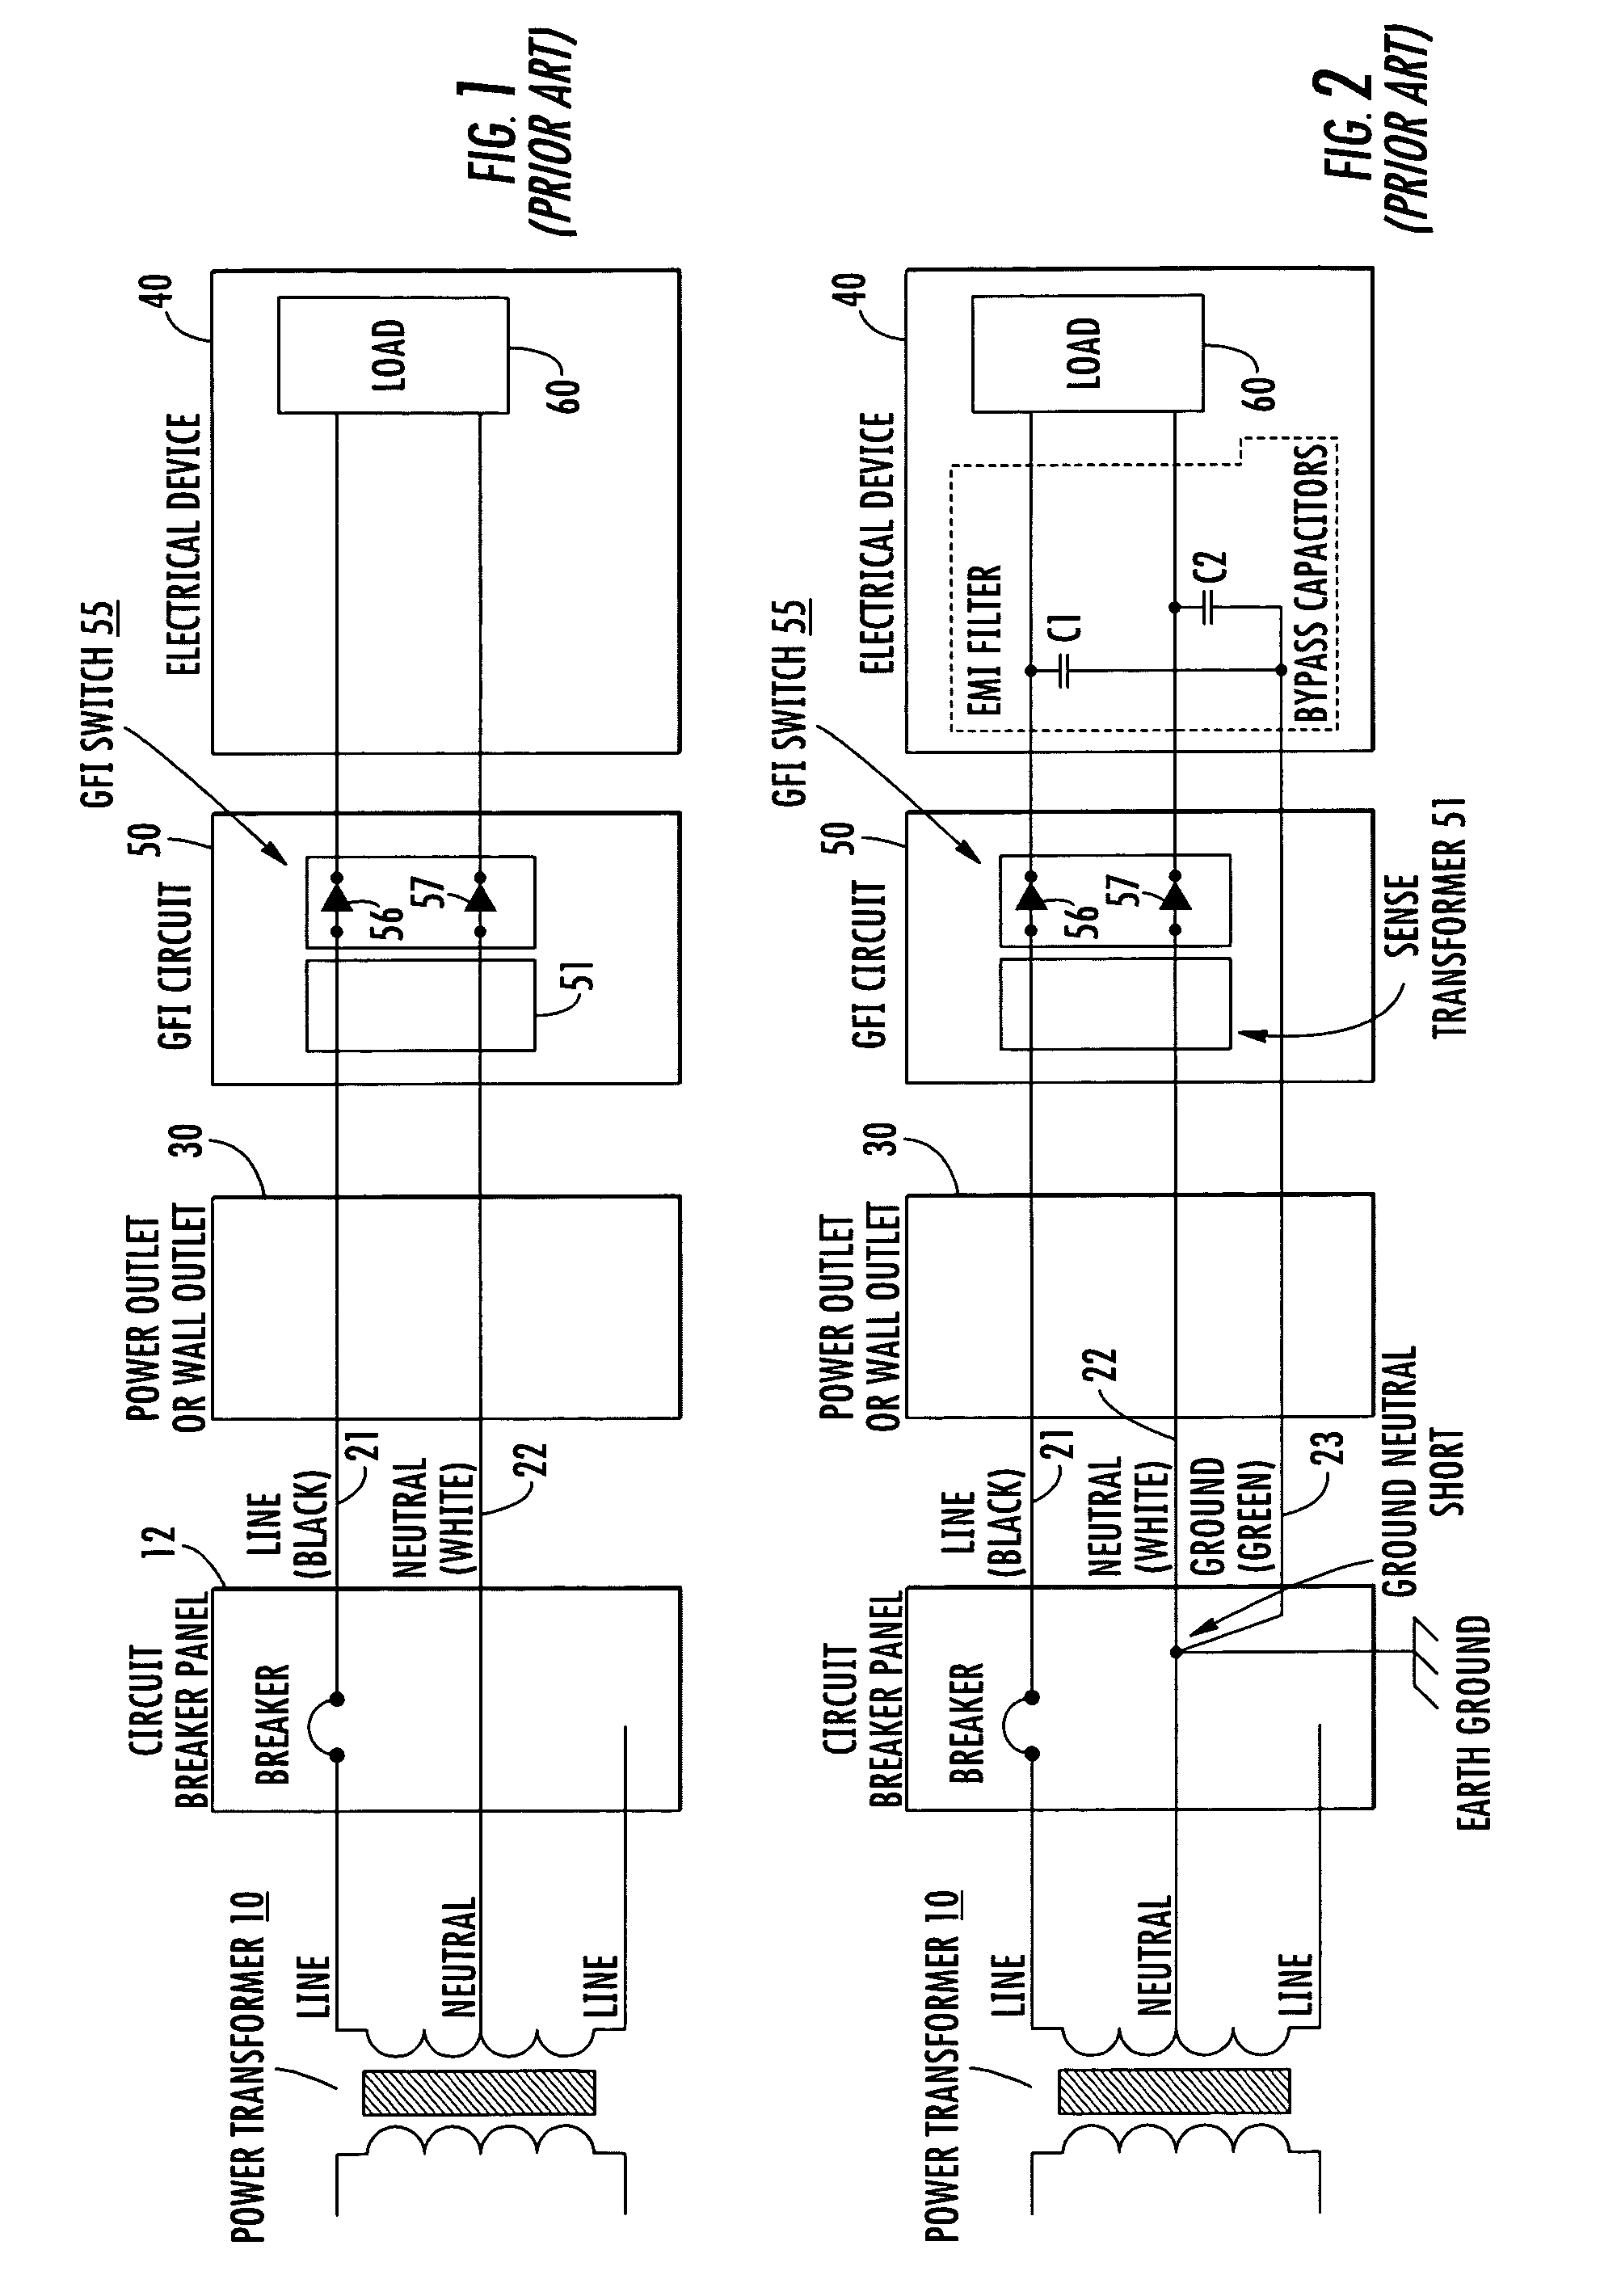 Transformer interface for preventing EMI-based current imbalances from falsely triggering ground fault interrupt